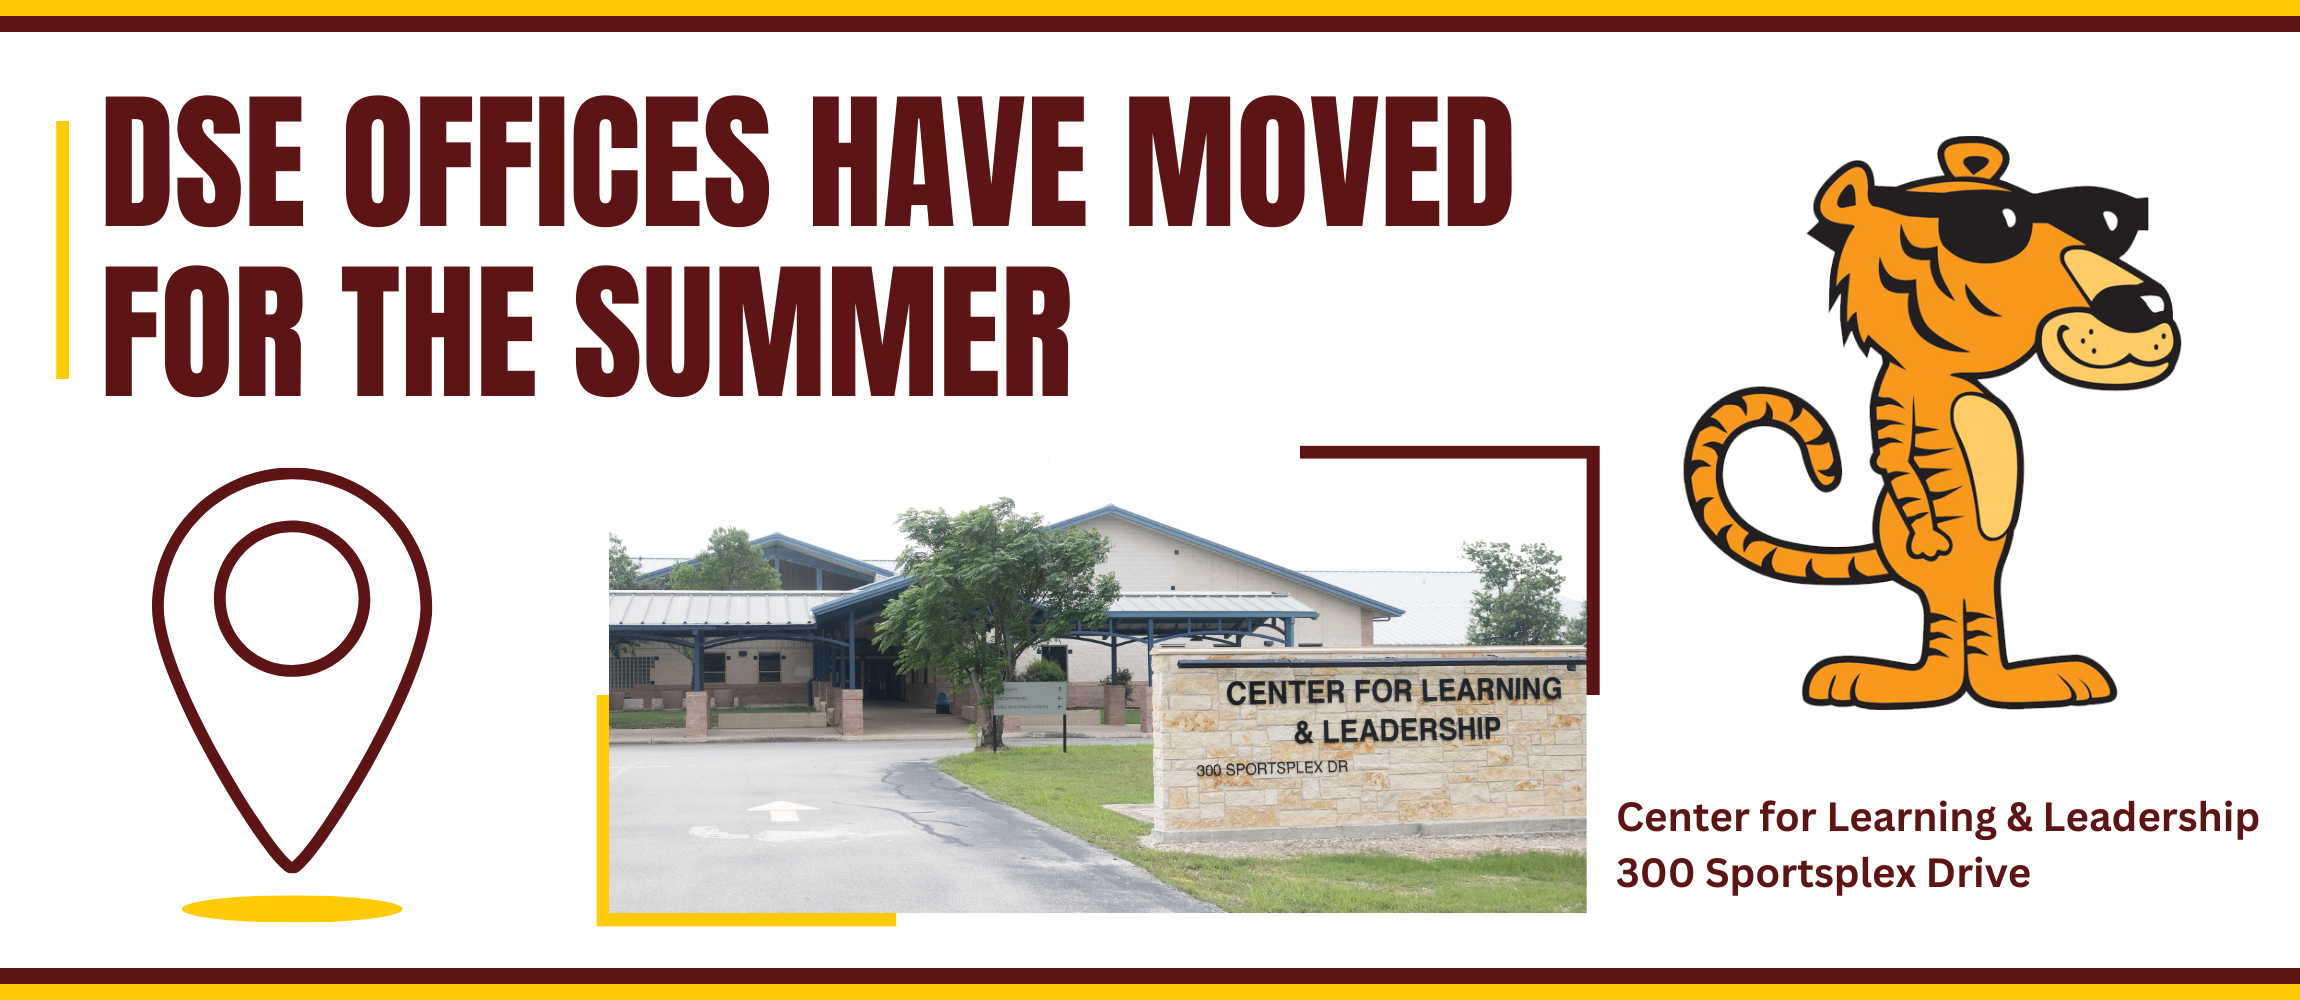 DSE offices have moved to the Center for Learning & Leadership for the summer.